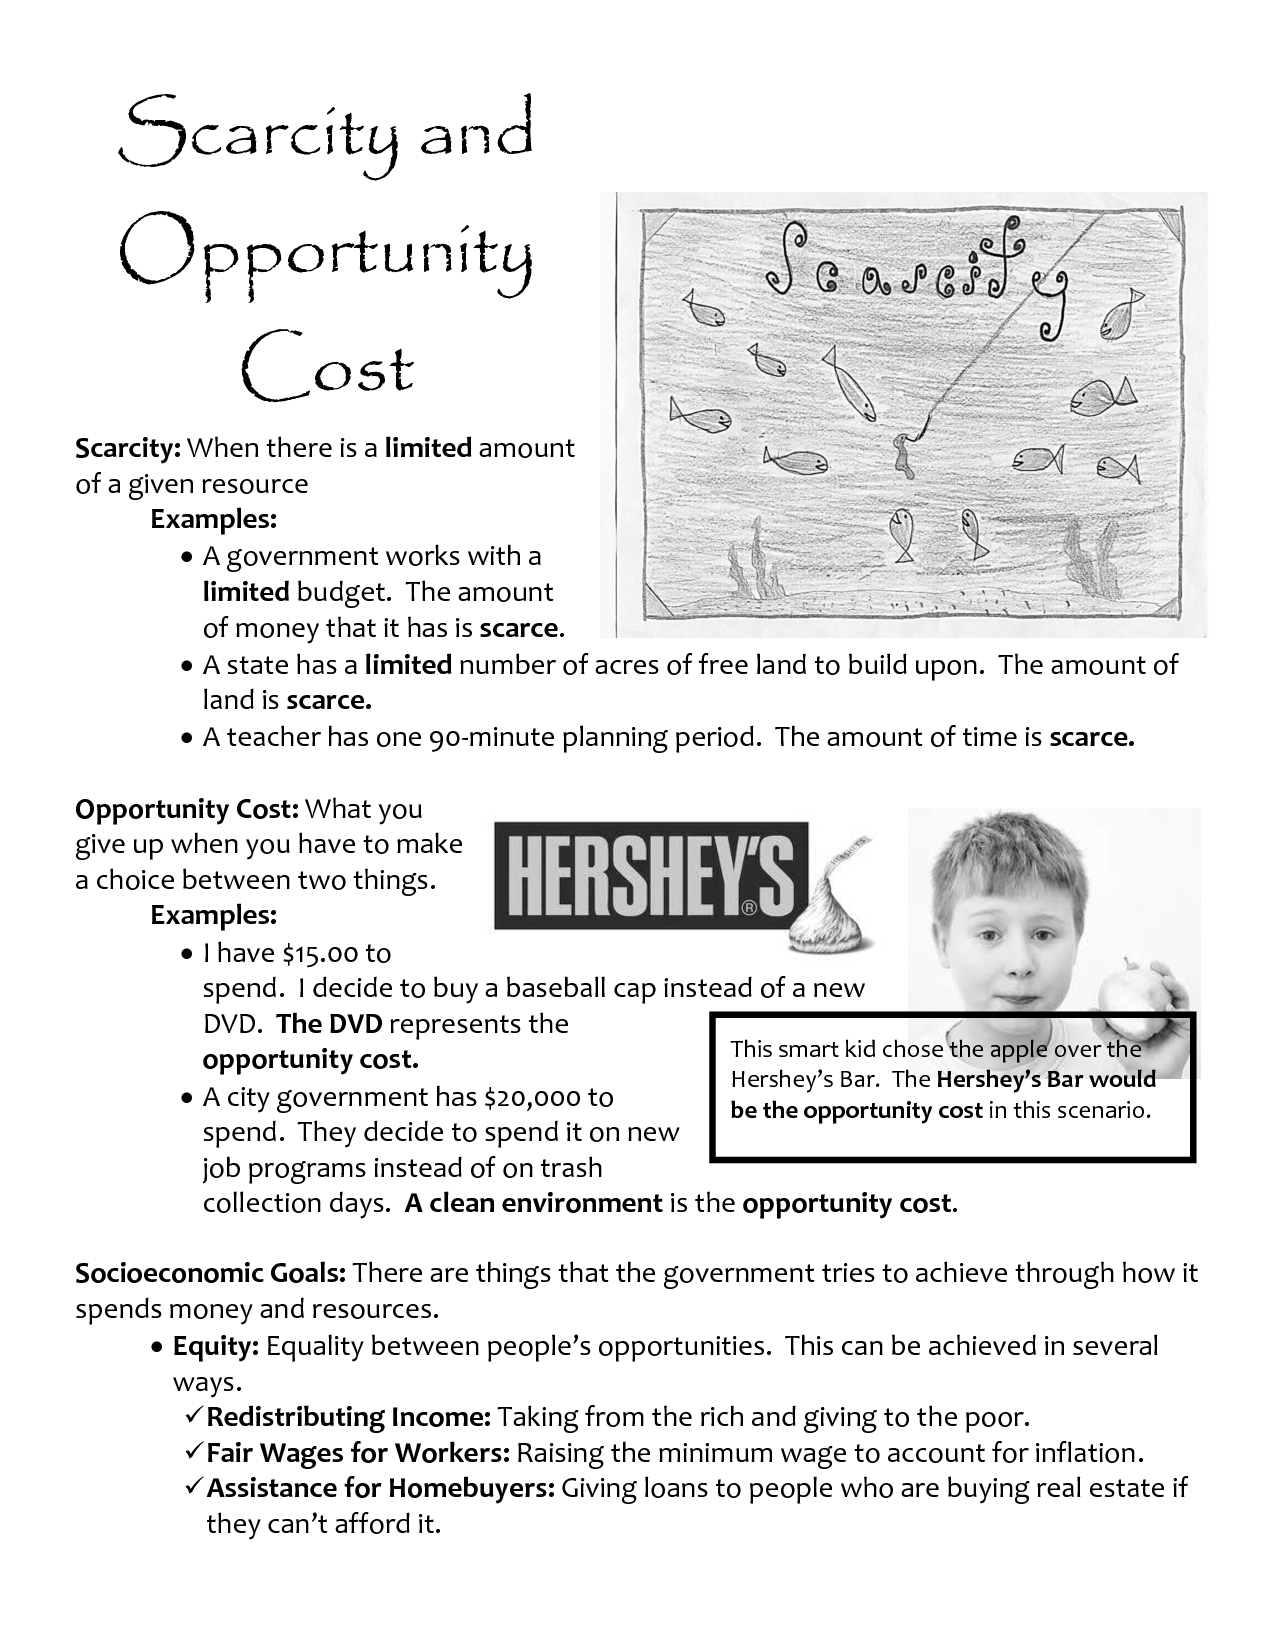 Scarcity and Opportunity Cost Worksheets for Kids Image